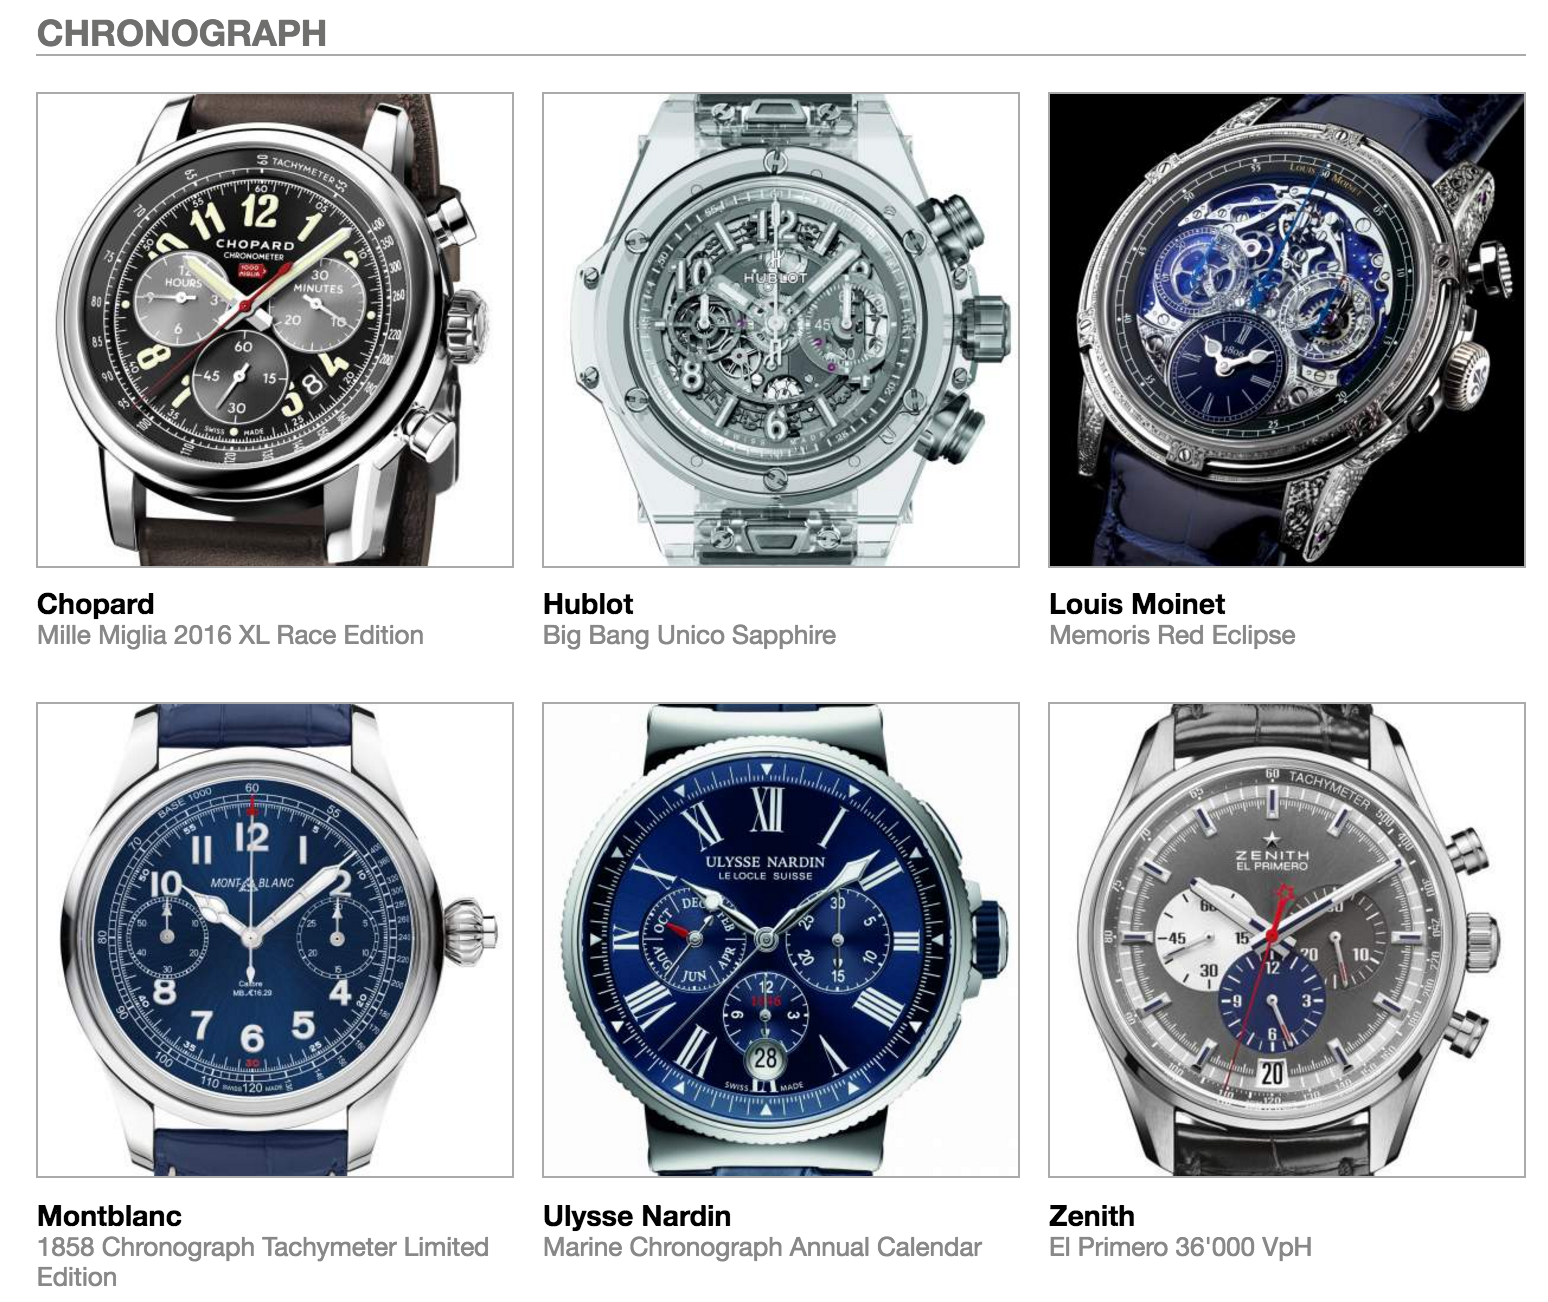 Pre-selected Chronograph watches in the 2016 GPHG